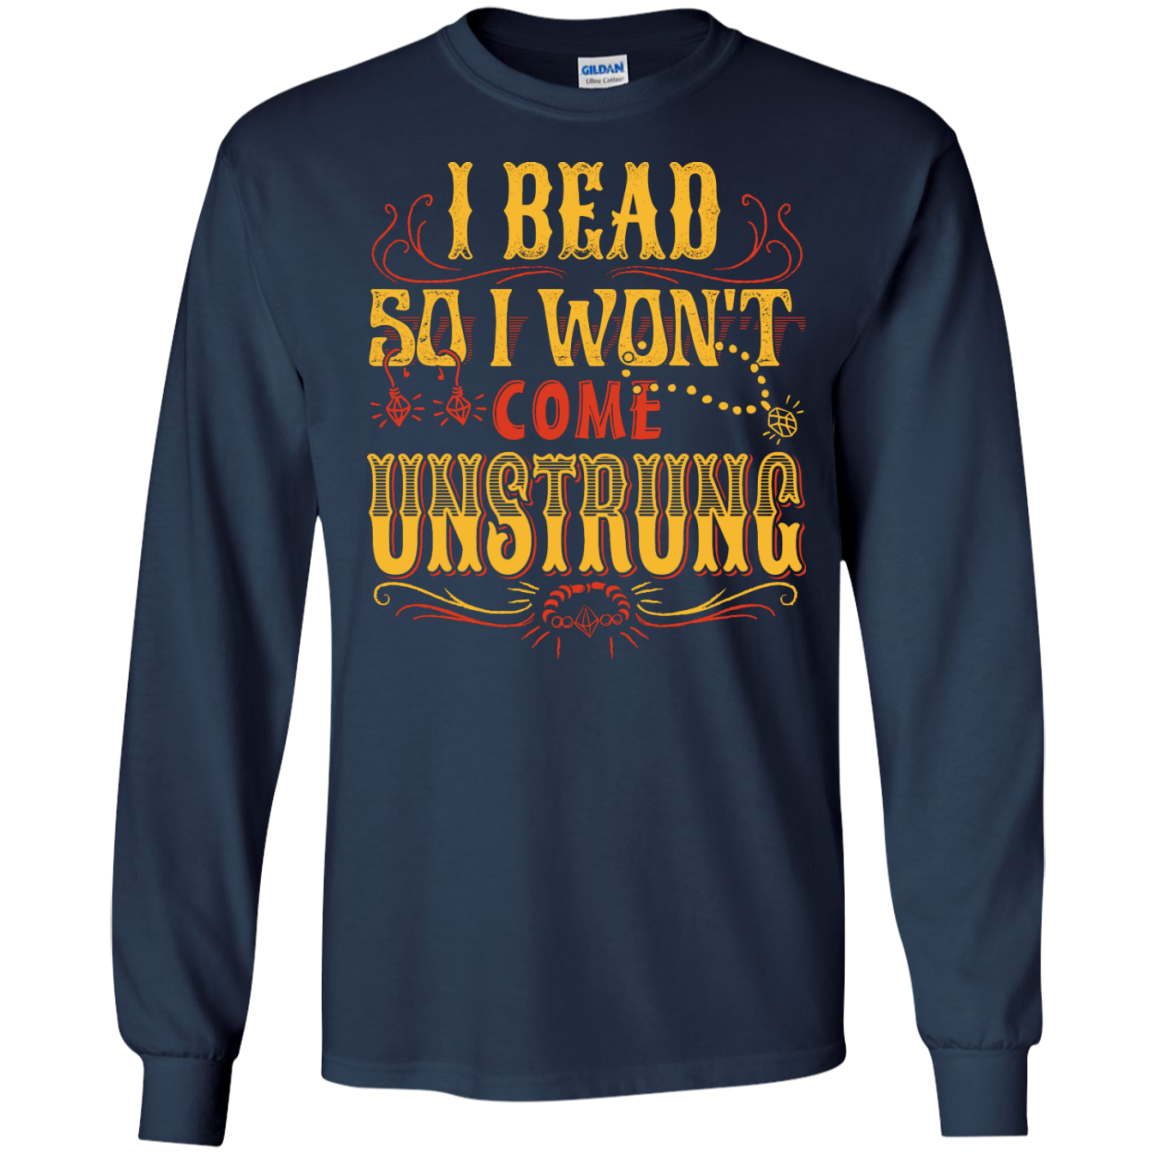 I Bead So I Won't Come Unstrung (gold) Long Sleeve Ultra Cotton T-Shirt - Crafter4Life - 5